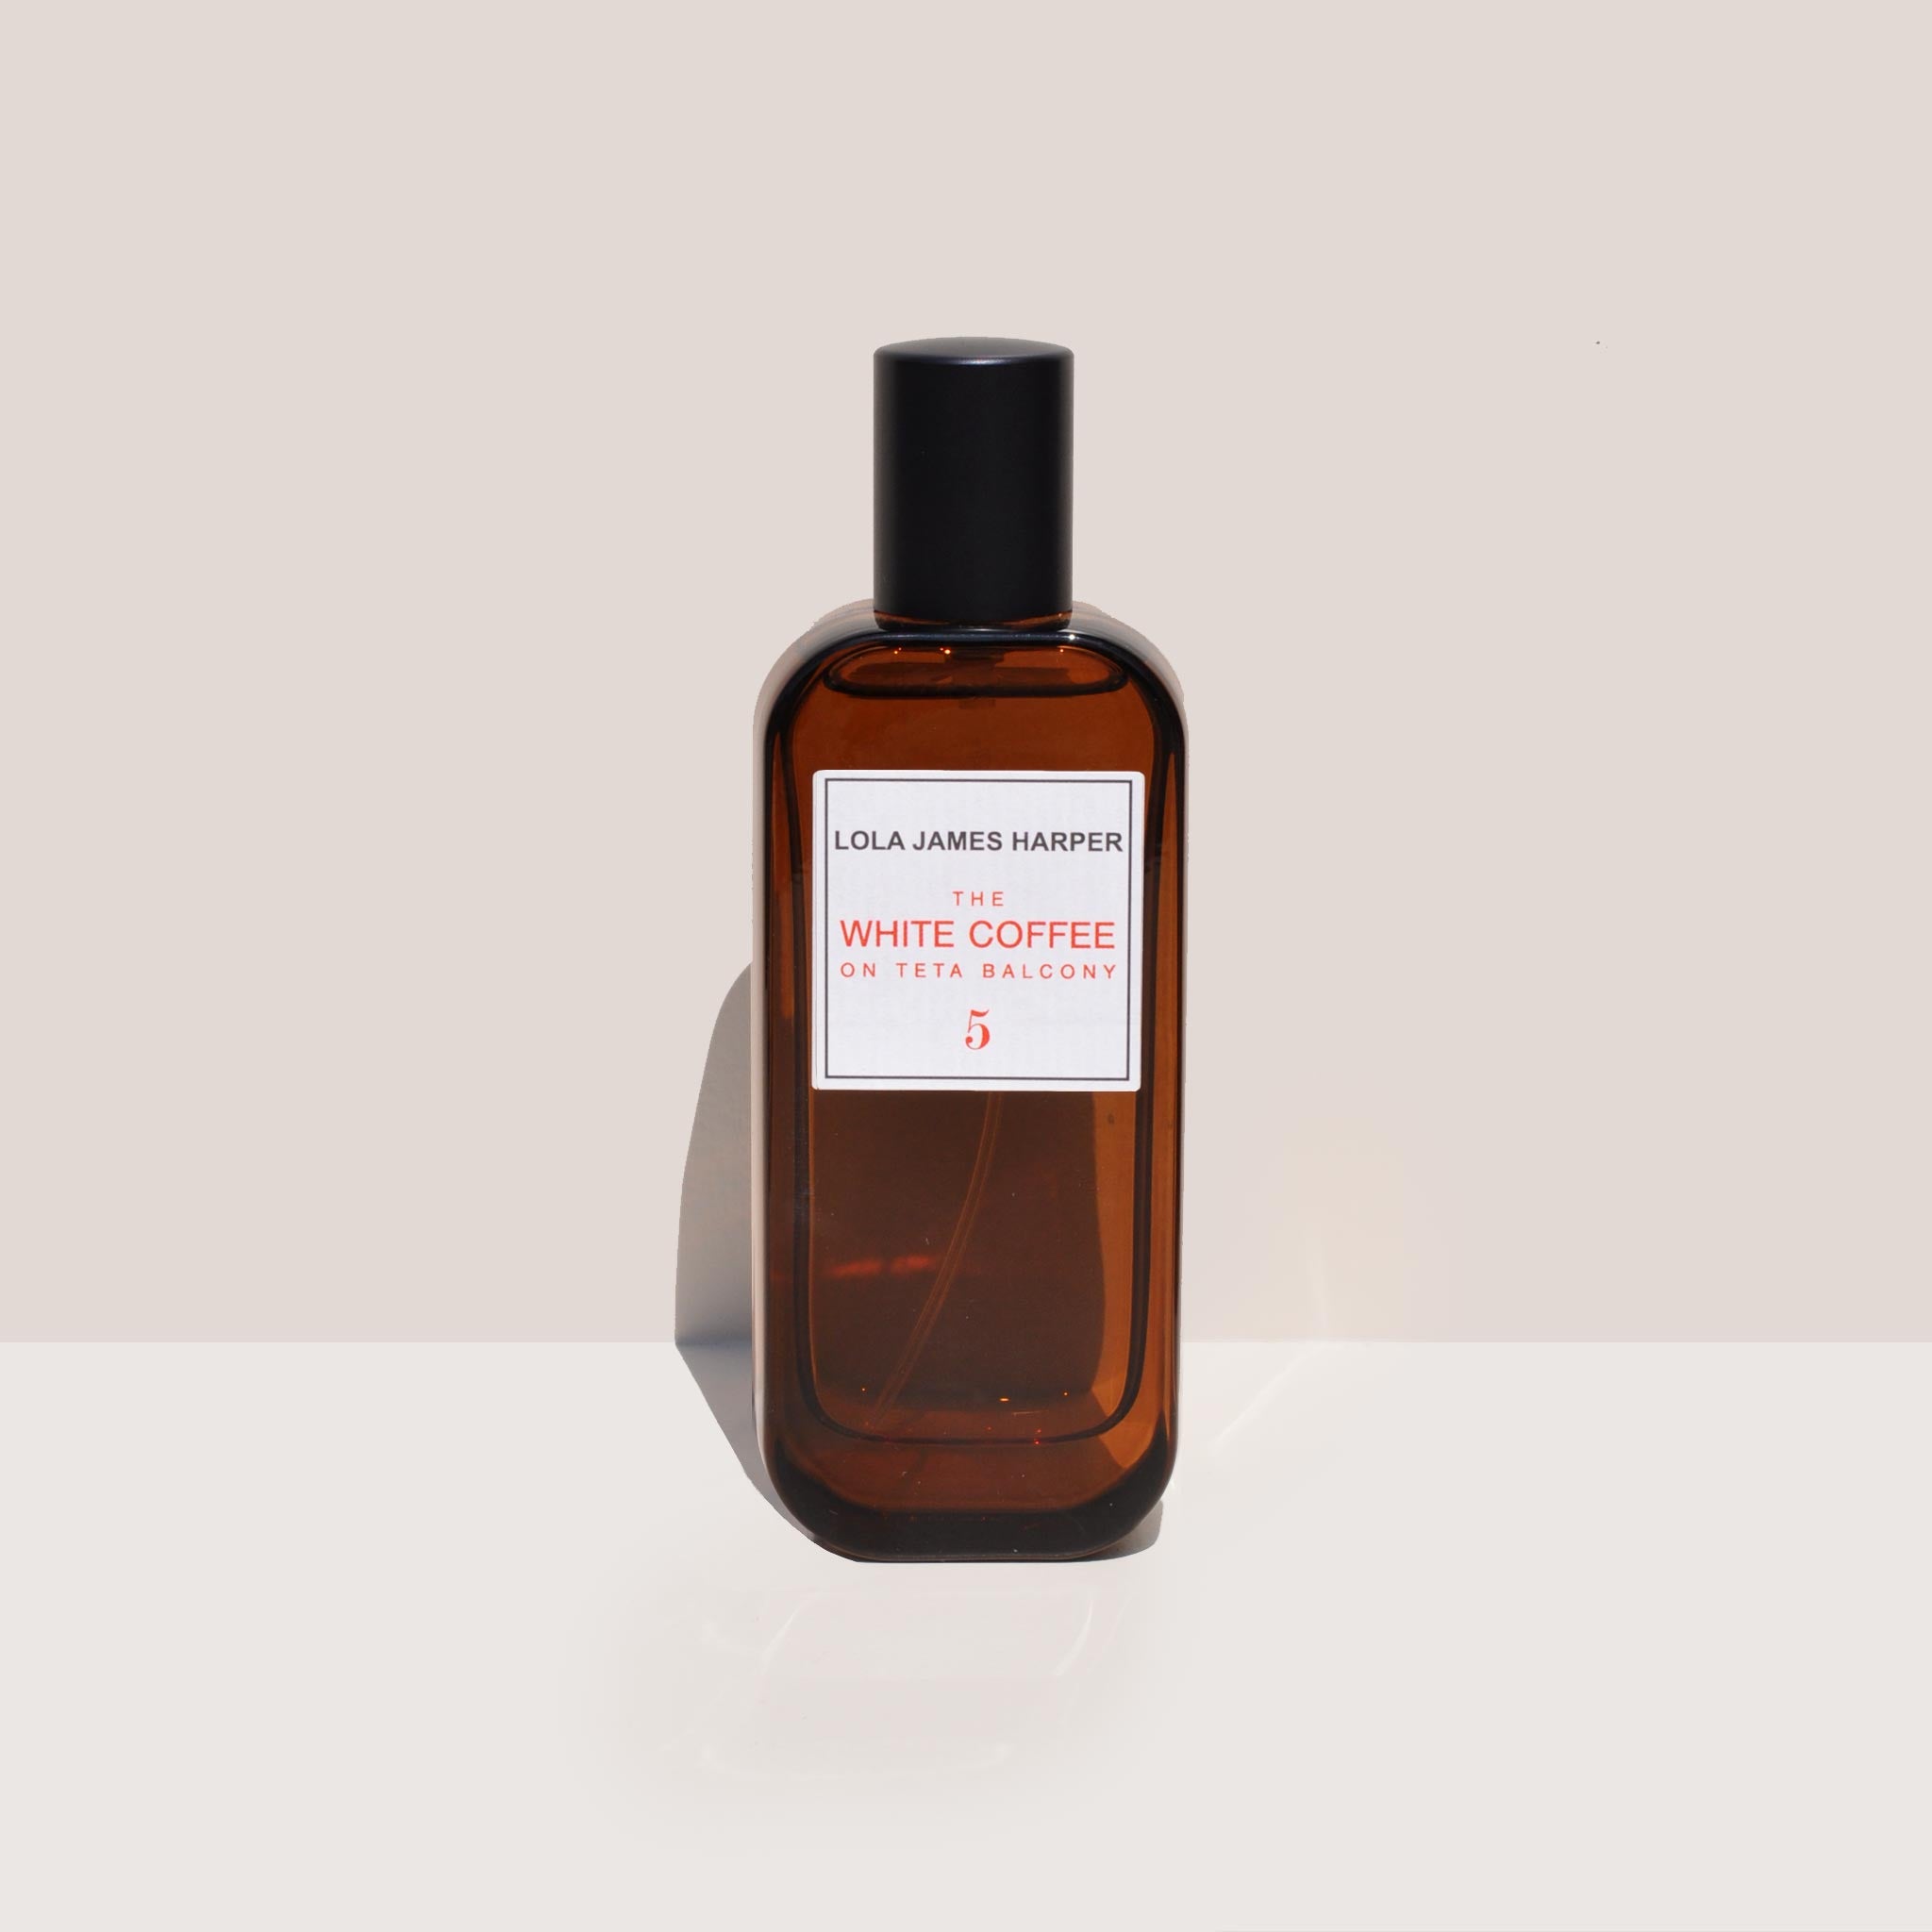 Lola James Harper - White Coffee Room Spray, available at LCD.